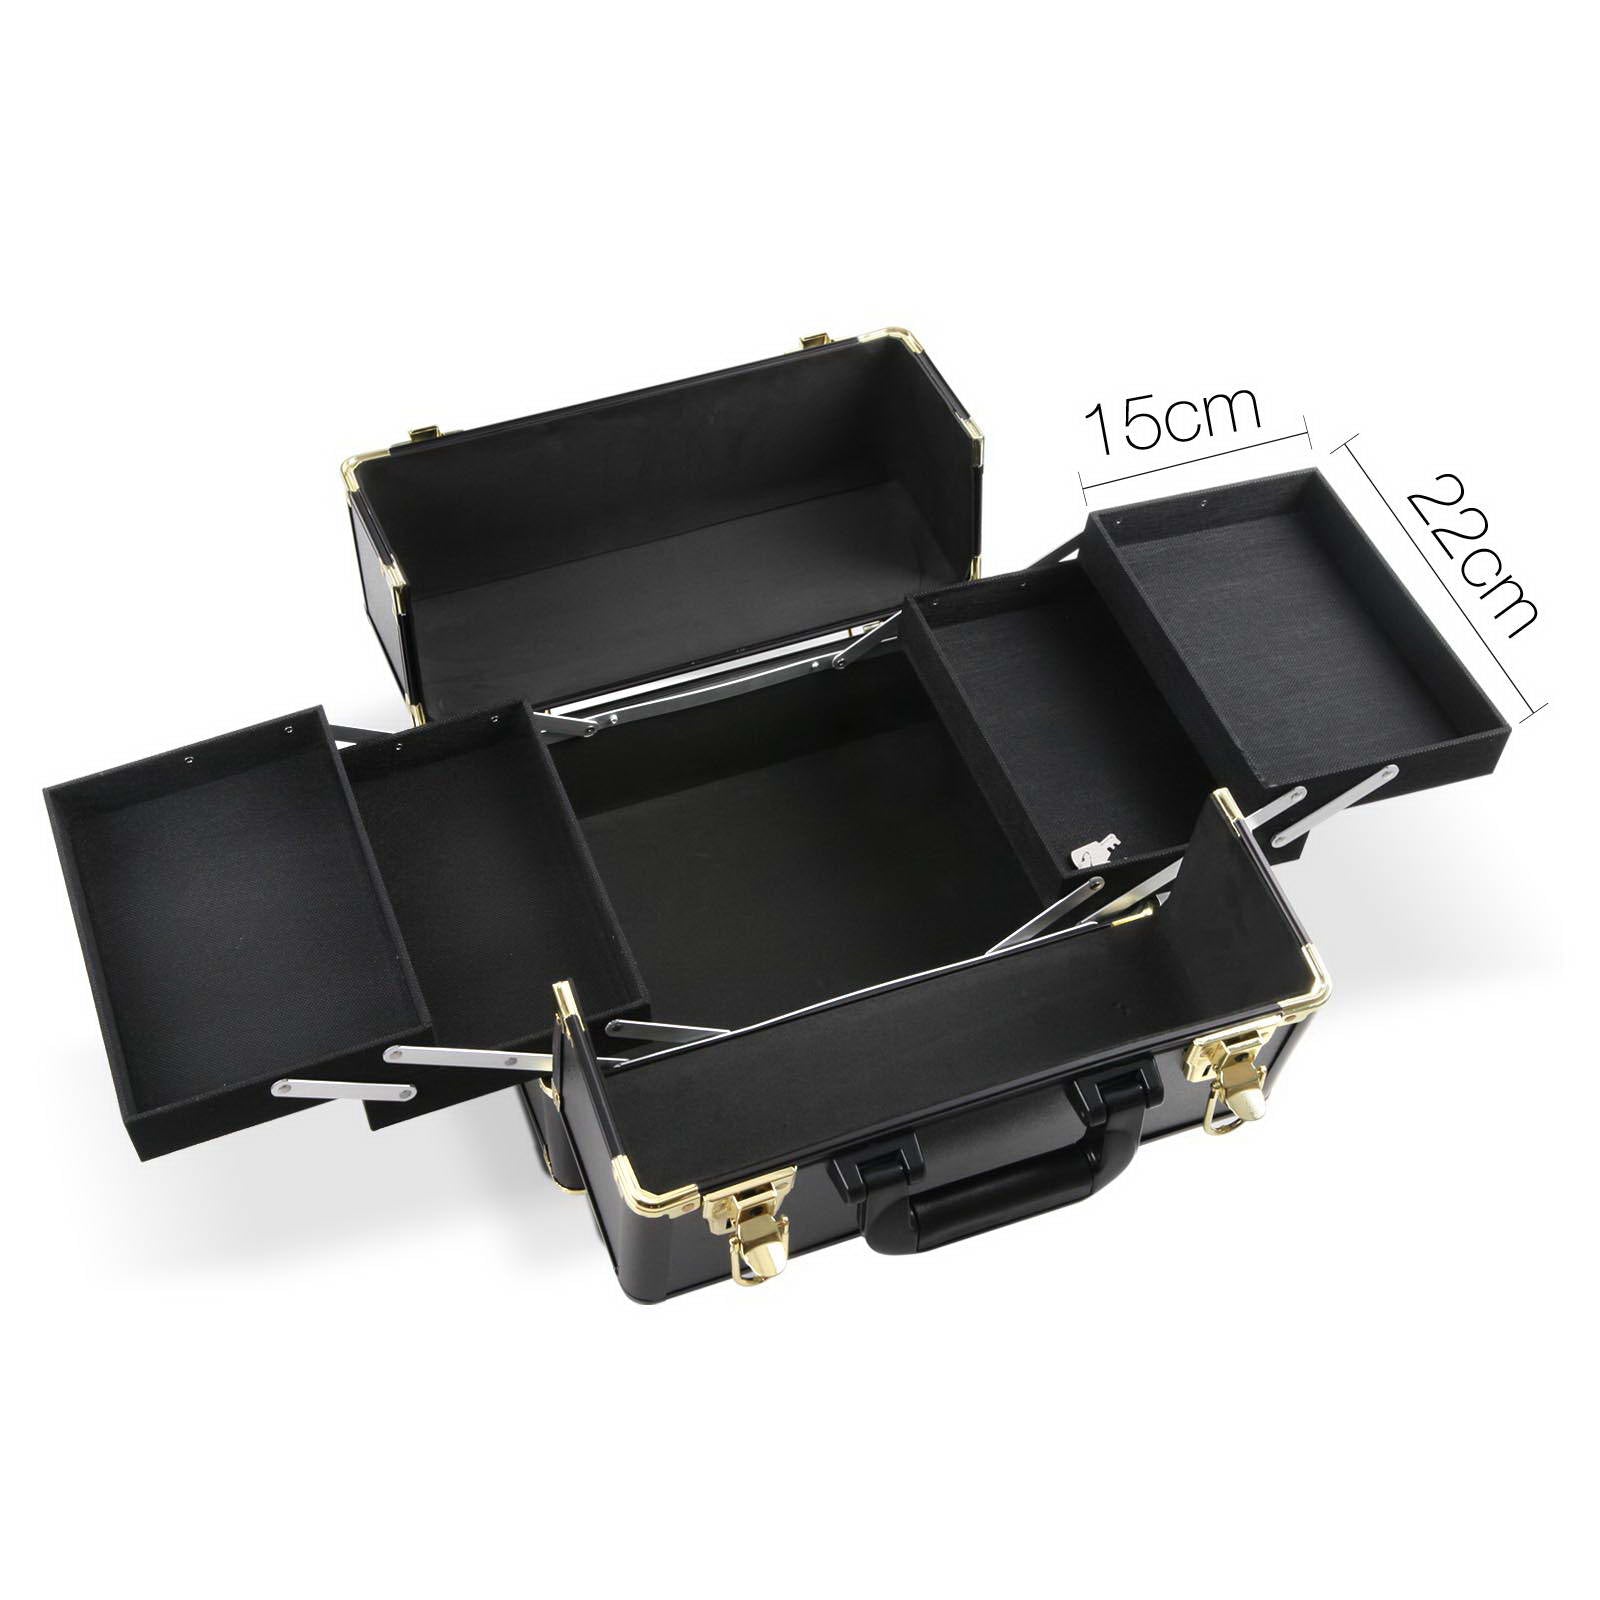 7 in 1 Portable Cosmetic Beauty Makeup Trolley - Black & Gold - image3